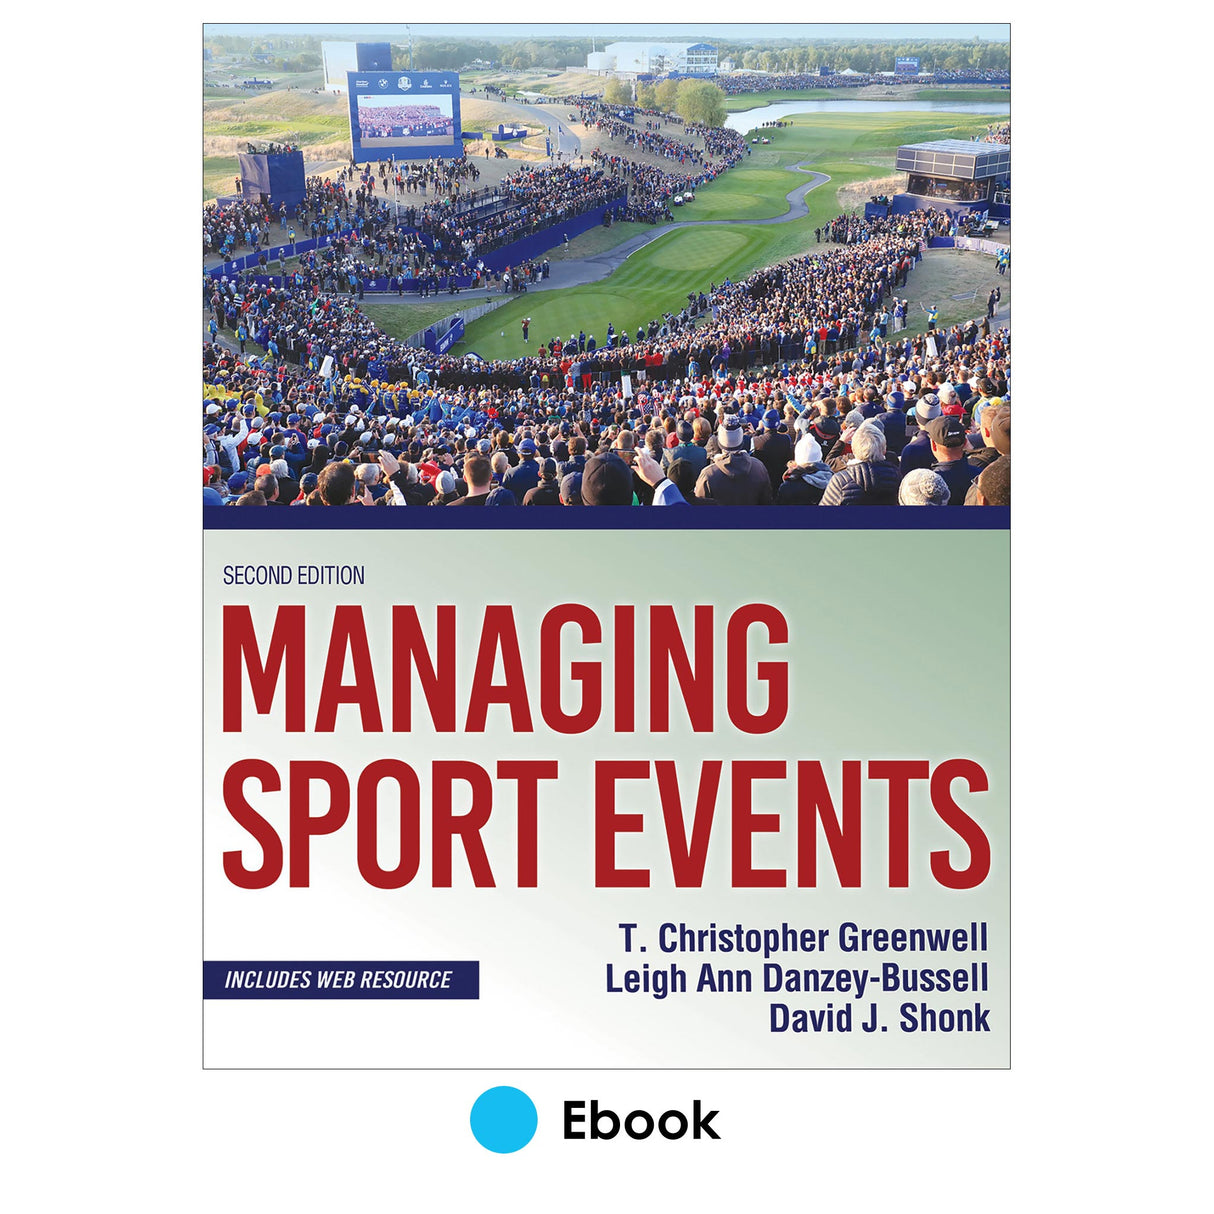 Managing Sport Events 2nd Edition epub With Web Resource